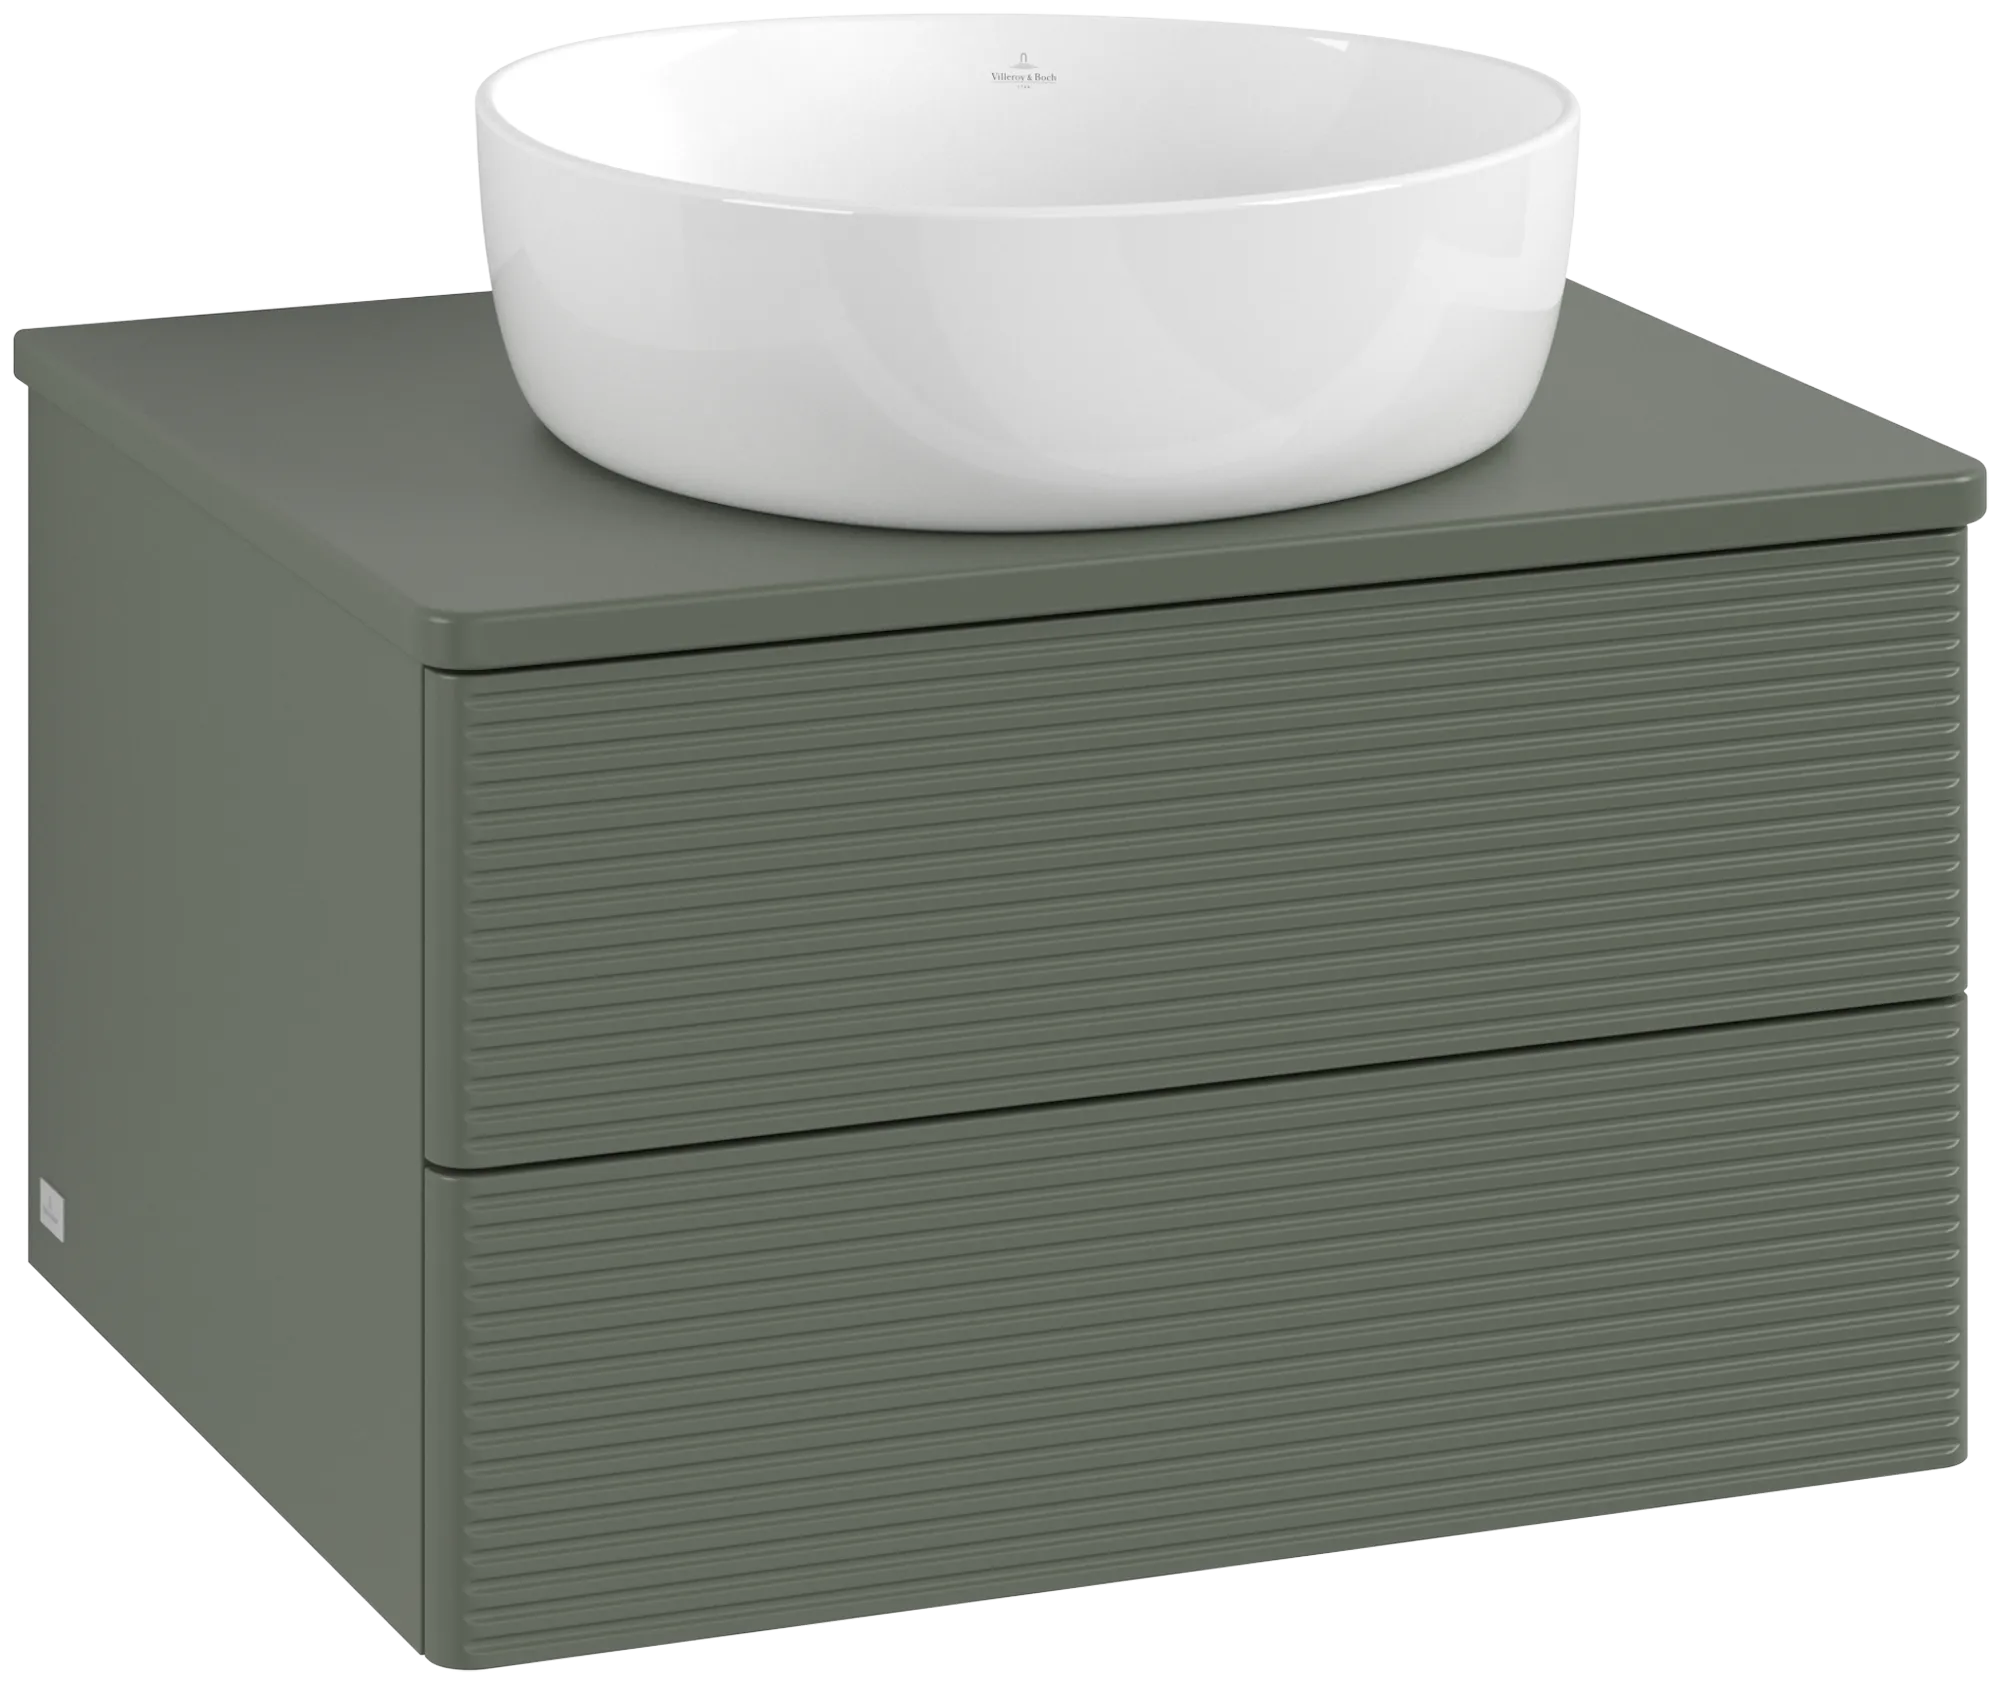 Picture of VILLEROY BOCH Antao Vanity unit, with lighting, 2 pull-out compartments, 600 x 360 x 500 mm, Front with grain texture, Leaf Green Matt Lacquer / Leaf Green Matt Lacquer #L18110HL